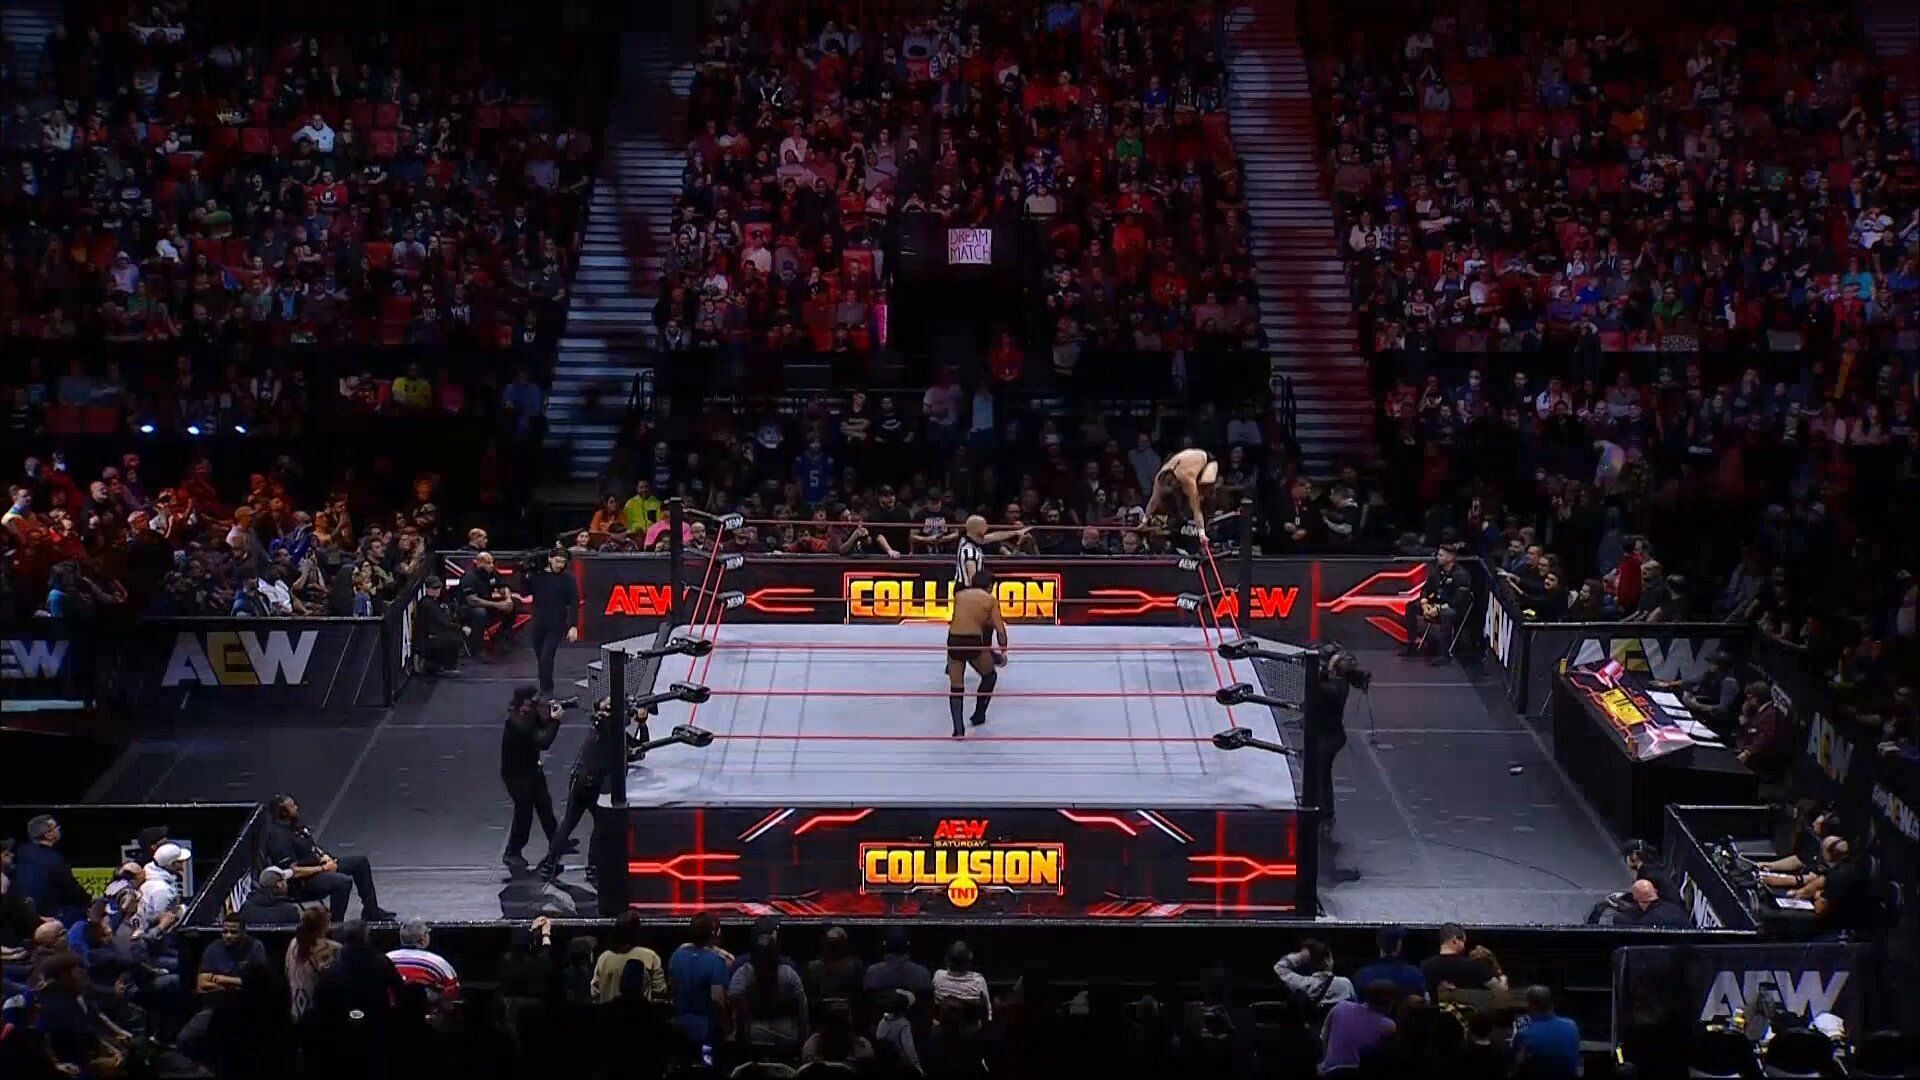 AEW fans pack their local arena for a live Collision event